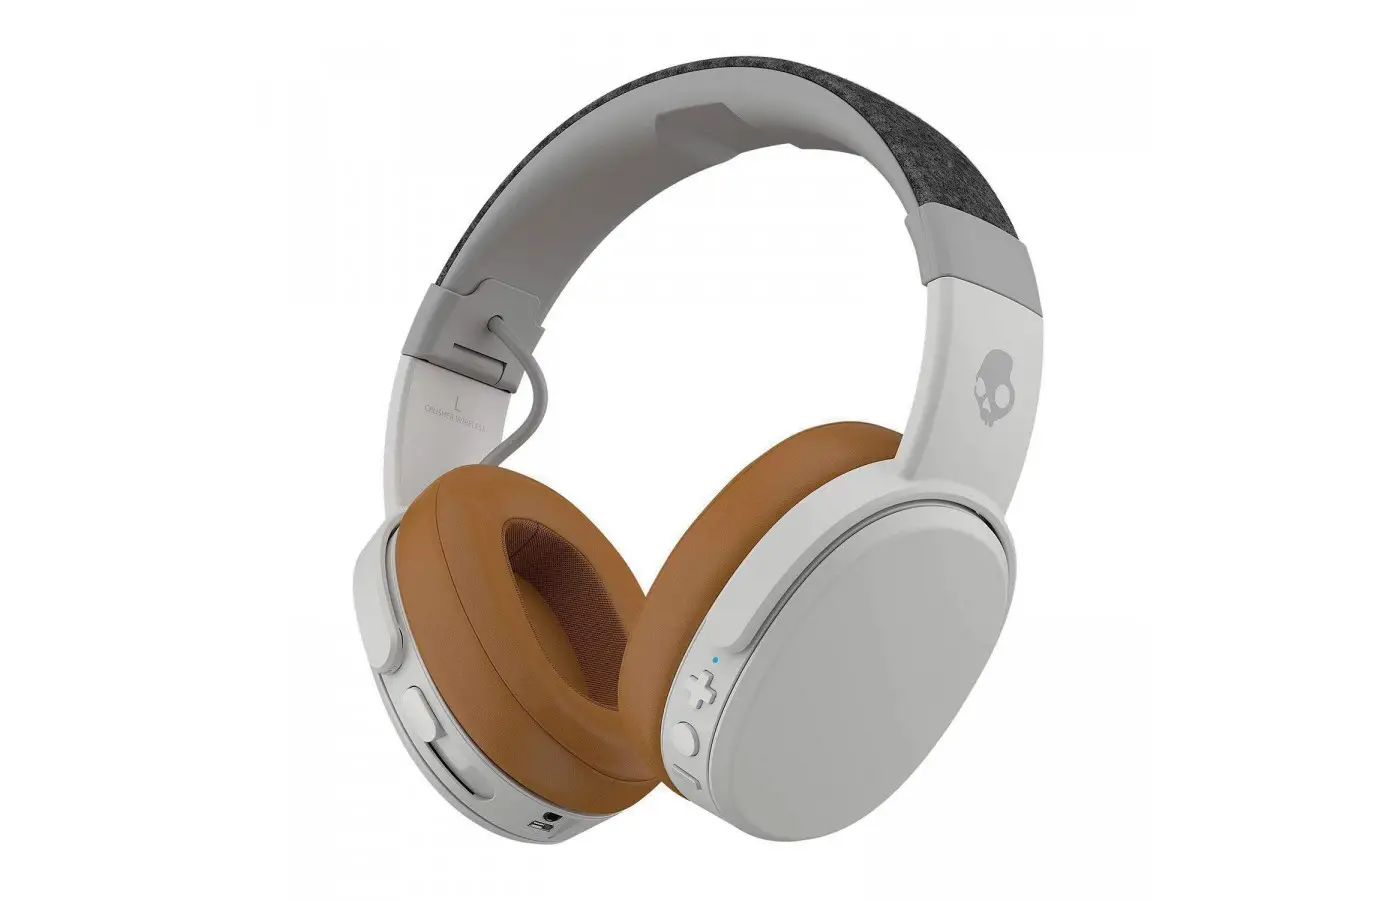 The headphones are available in two colors.